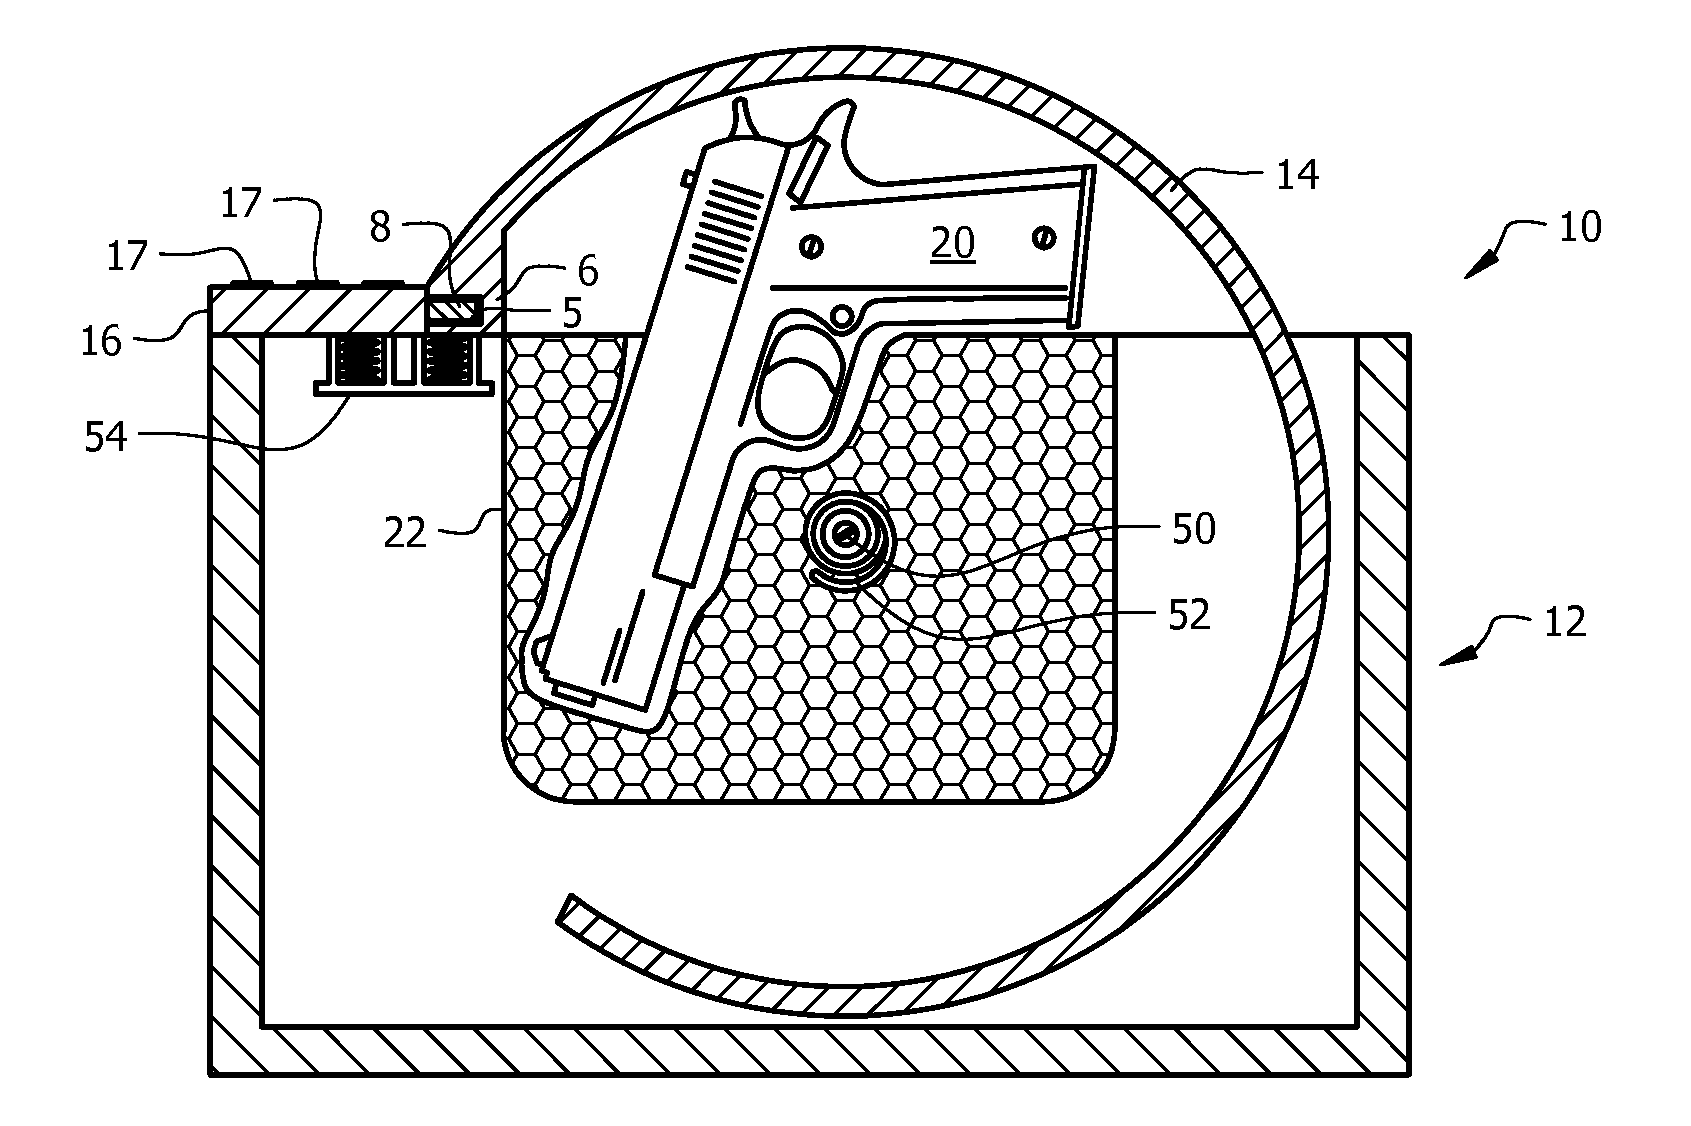 System, method and apparatus for securing valuables